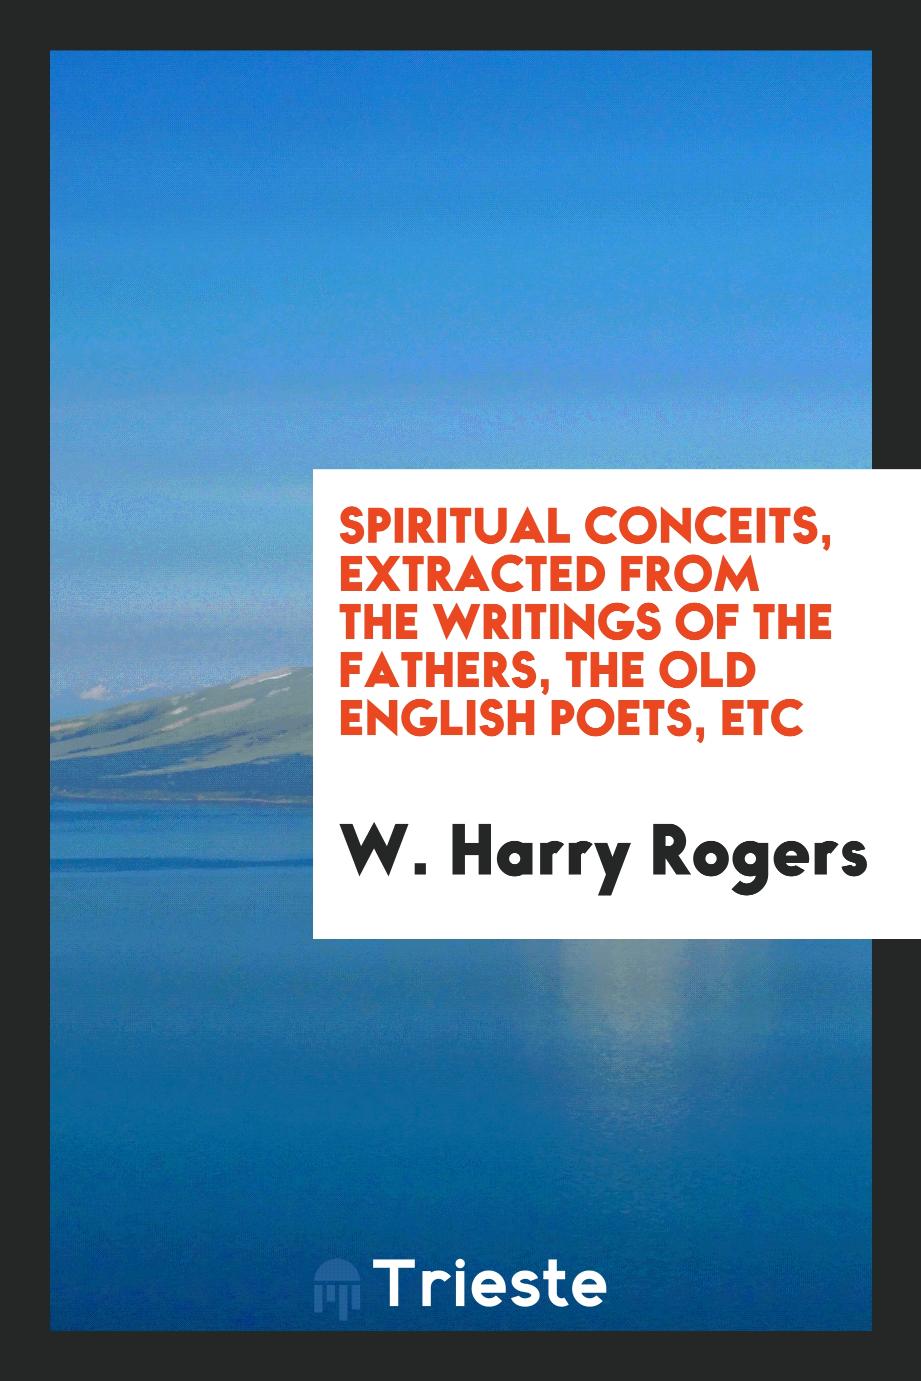 Spiritual conceits, extracted from the writings of the fathers, the old English poets, etc